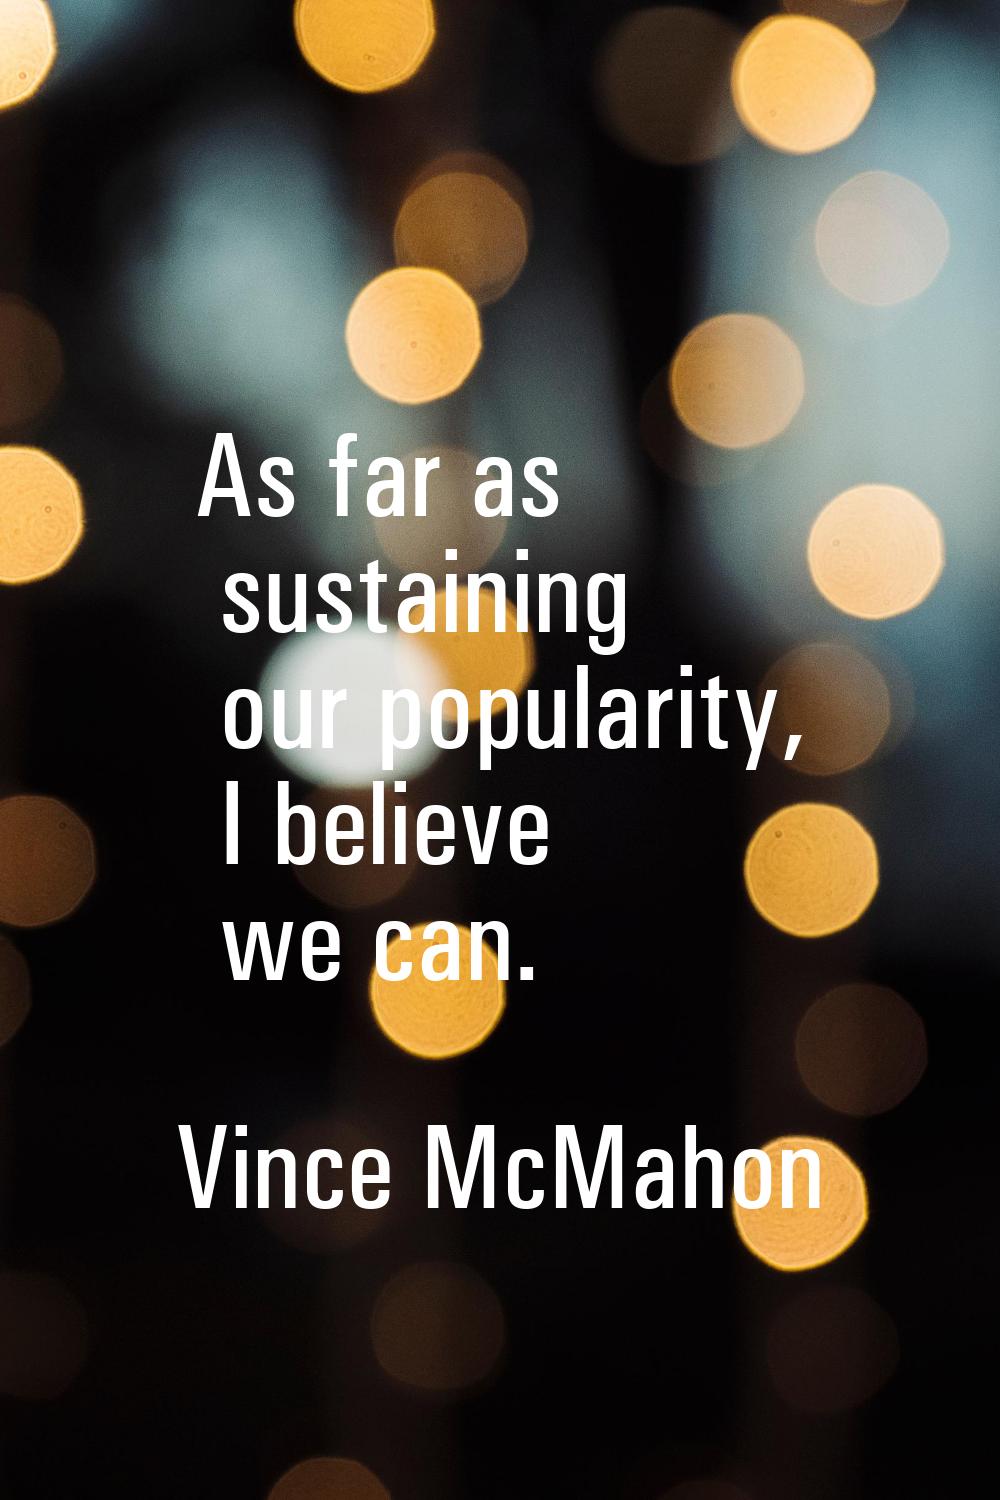 As far as sustaining our popularity, I believe we can.